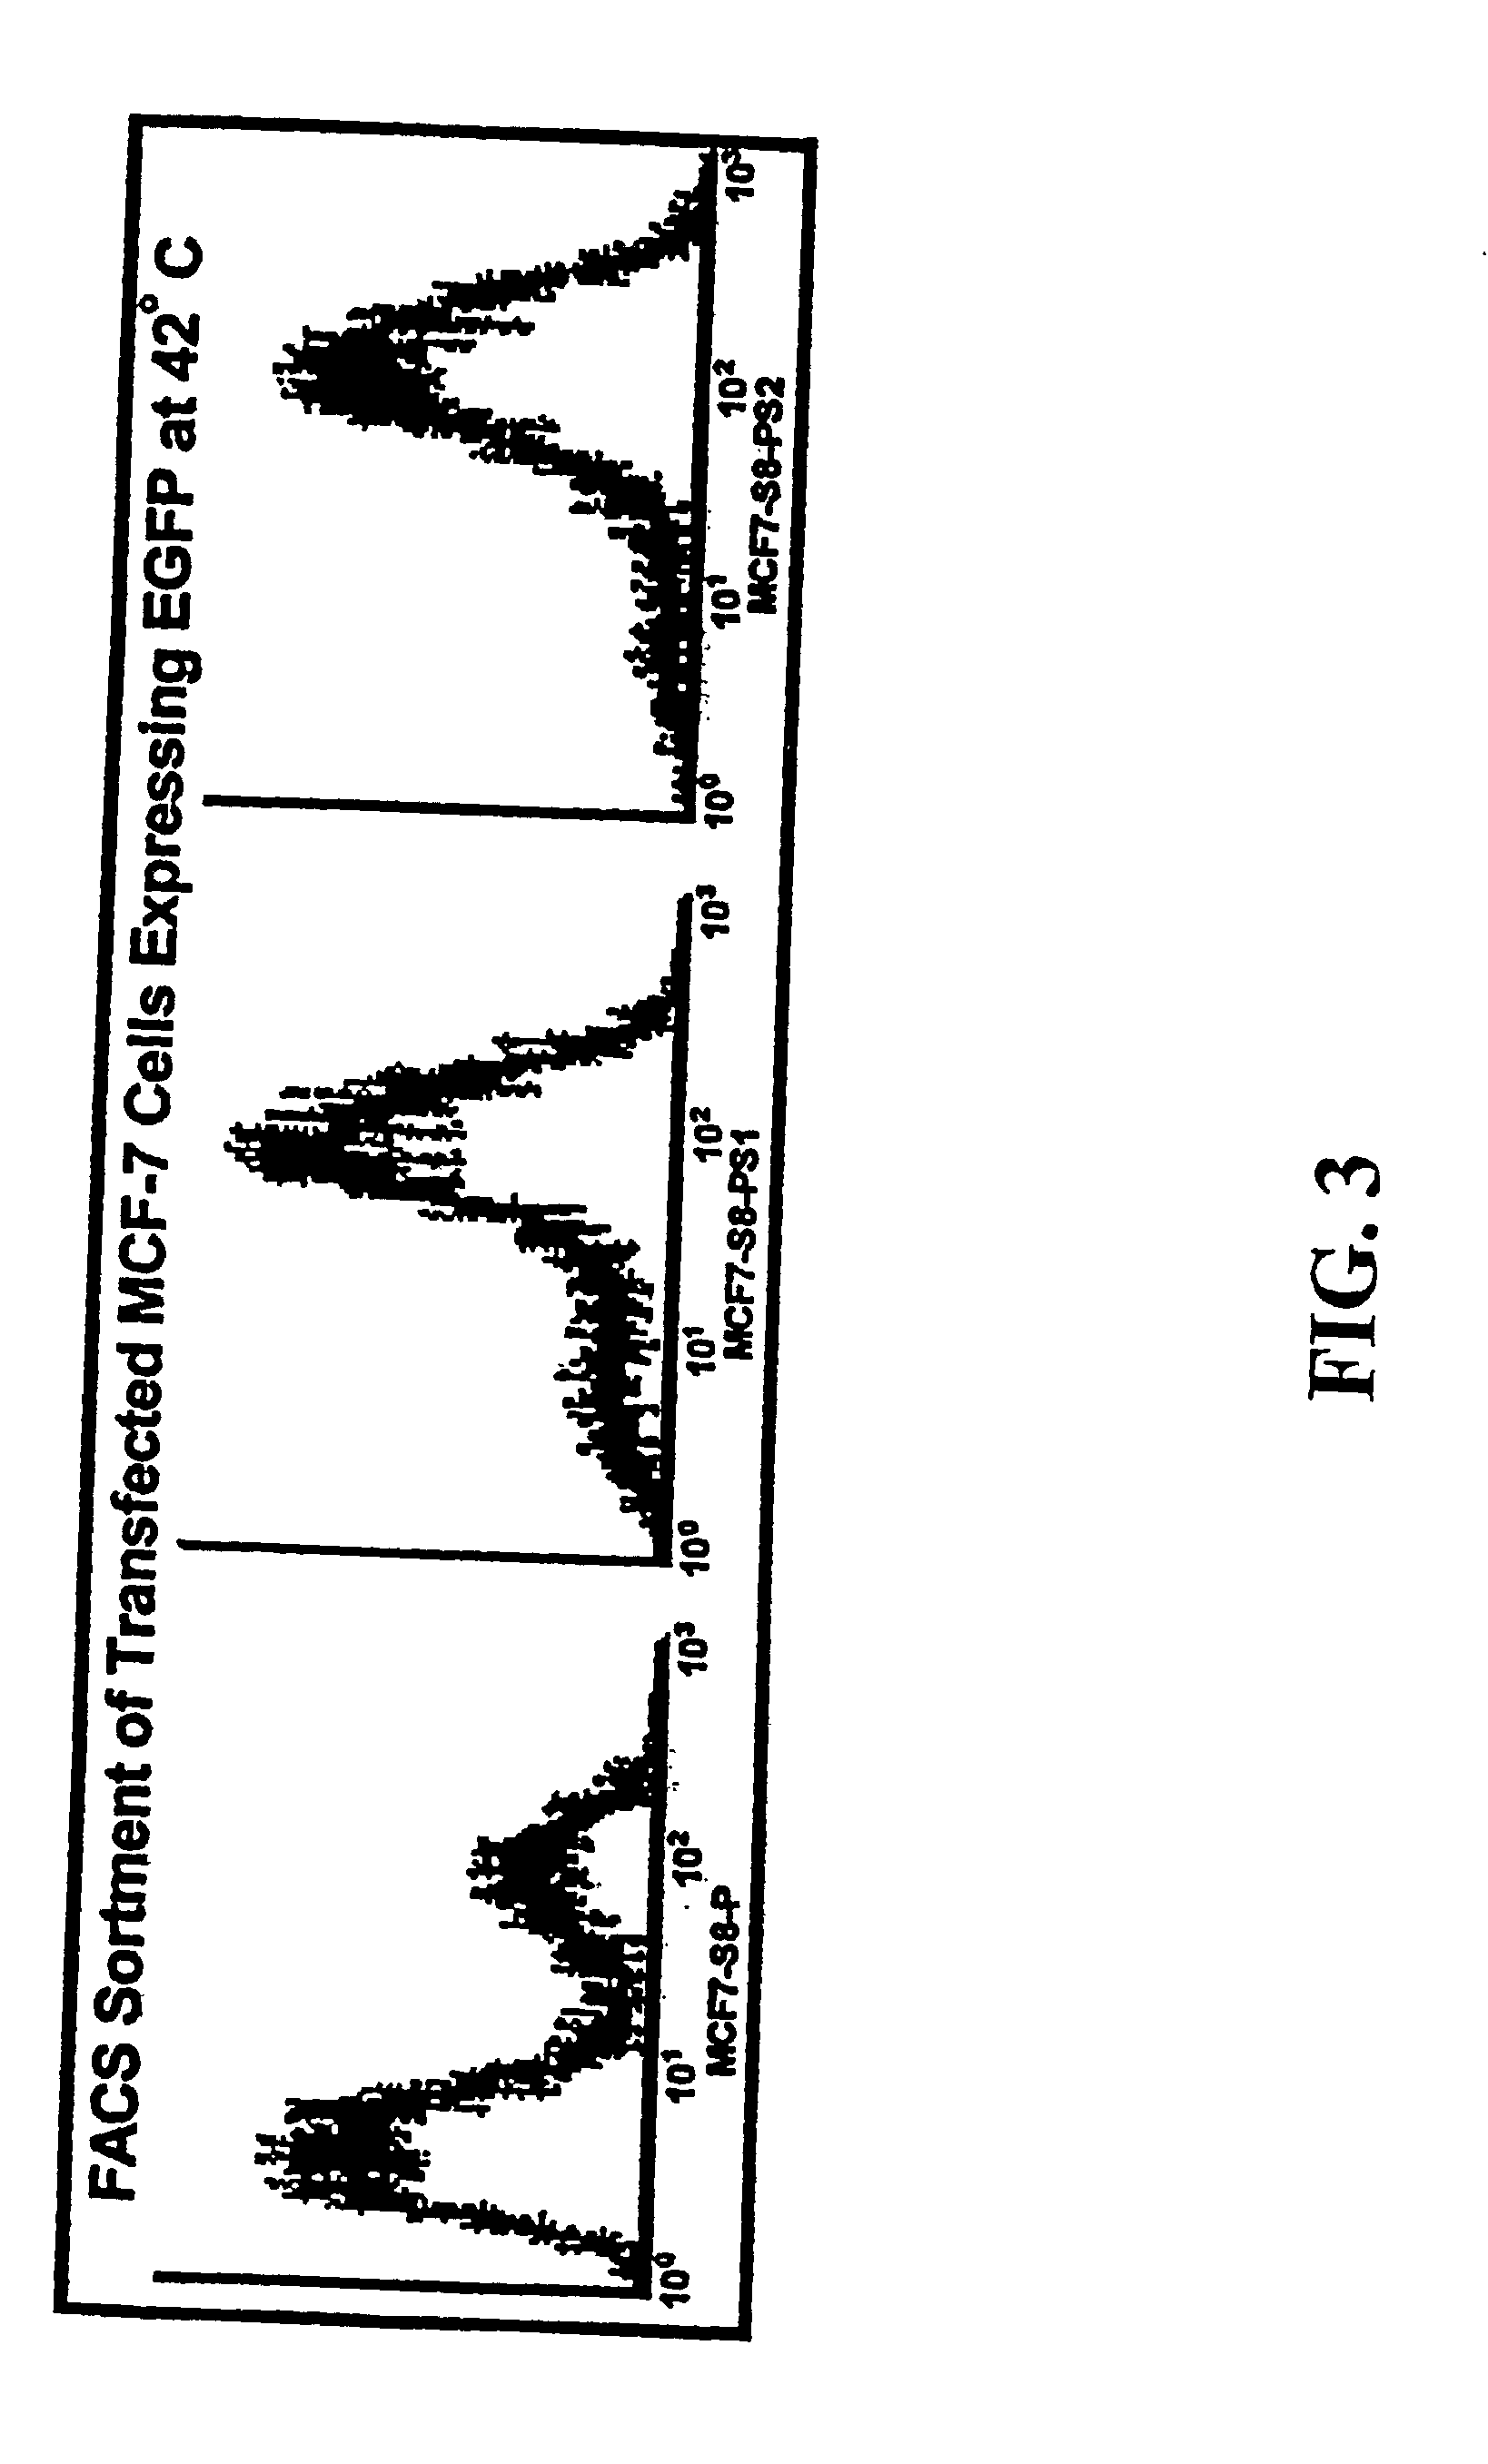 Hyperthermic inducible expression vectors for gene therapy and methods of use thereof